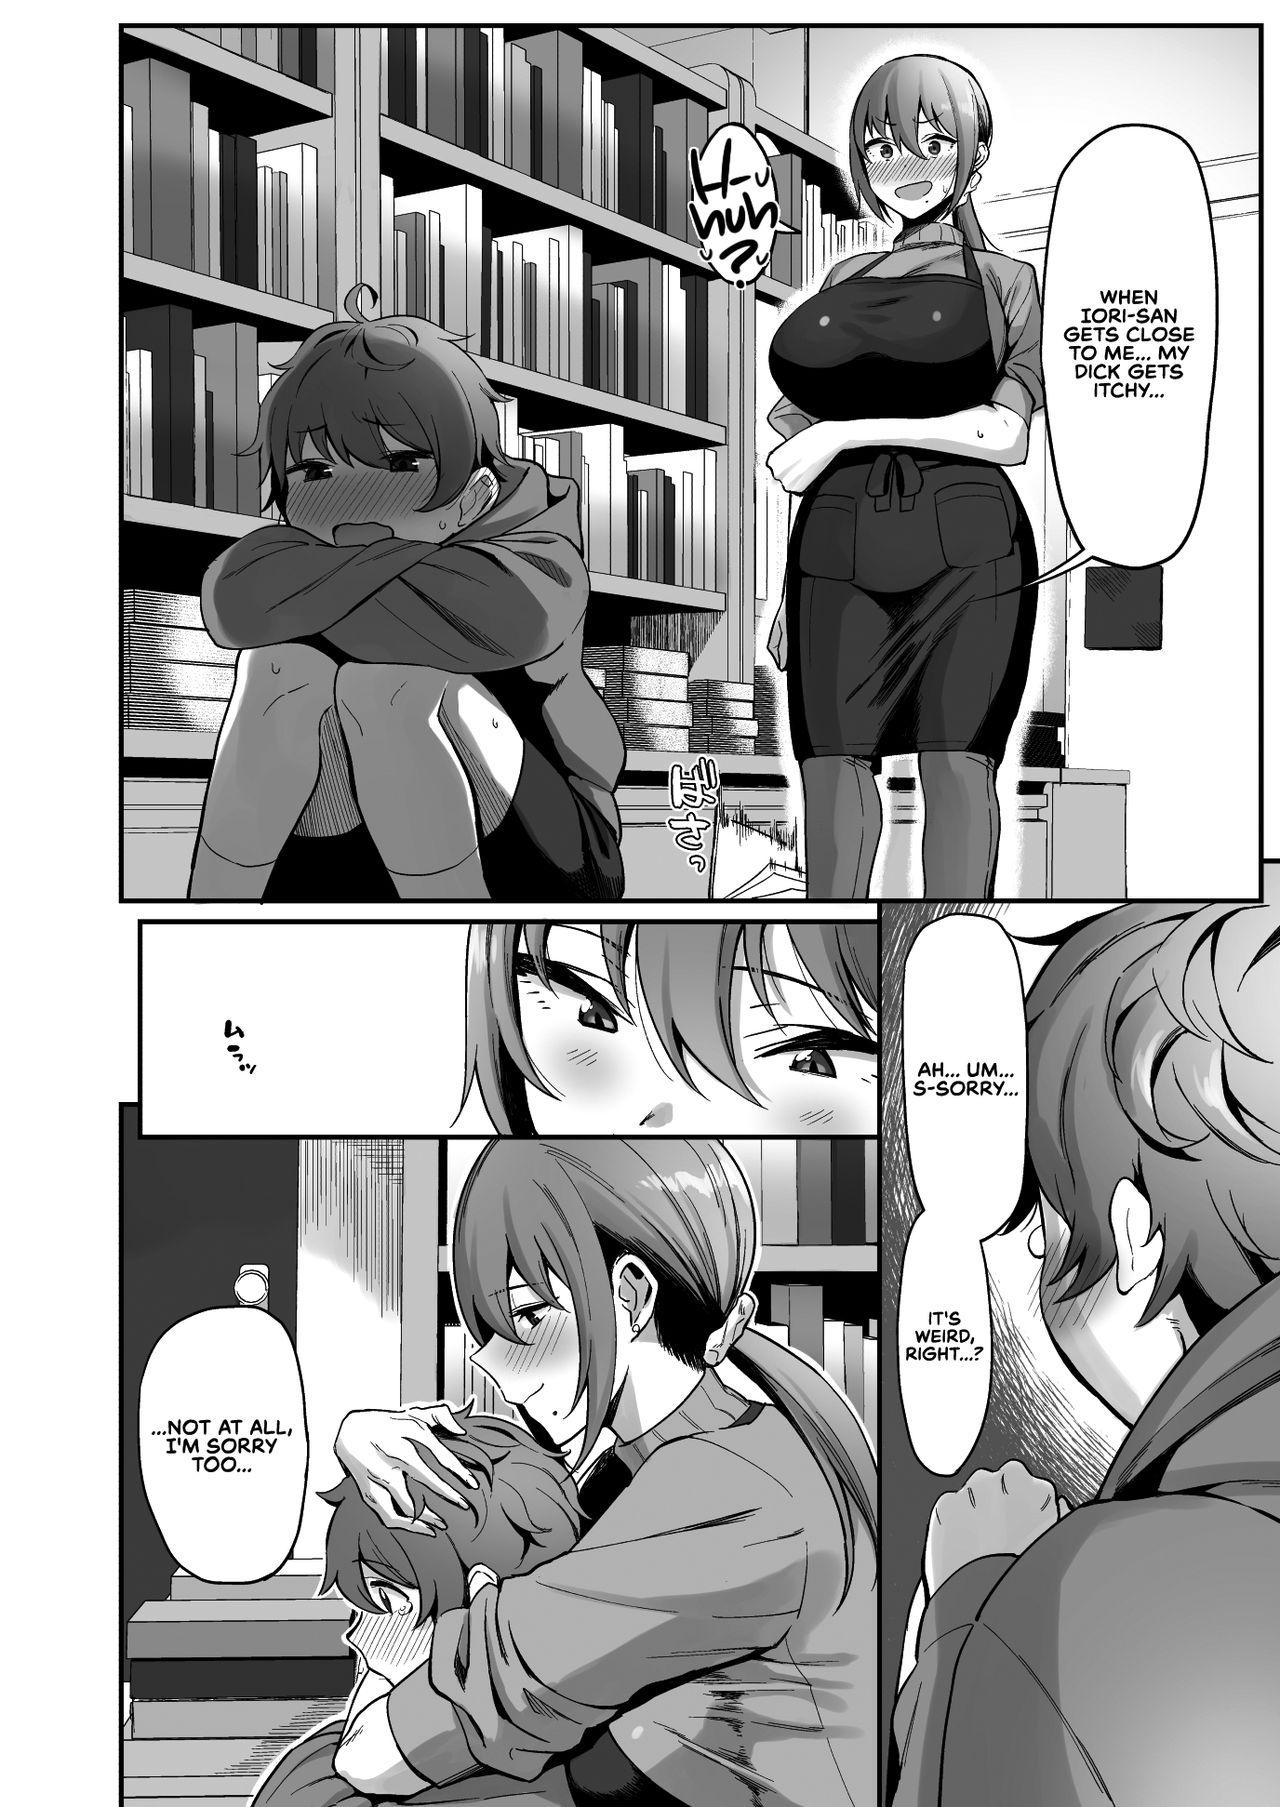 Furuhonya no Onee-san to | With The Lady From The Used Book Shop 9